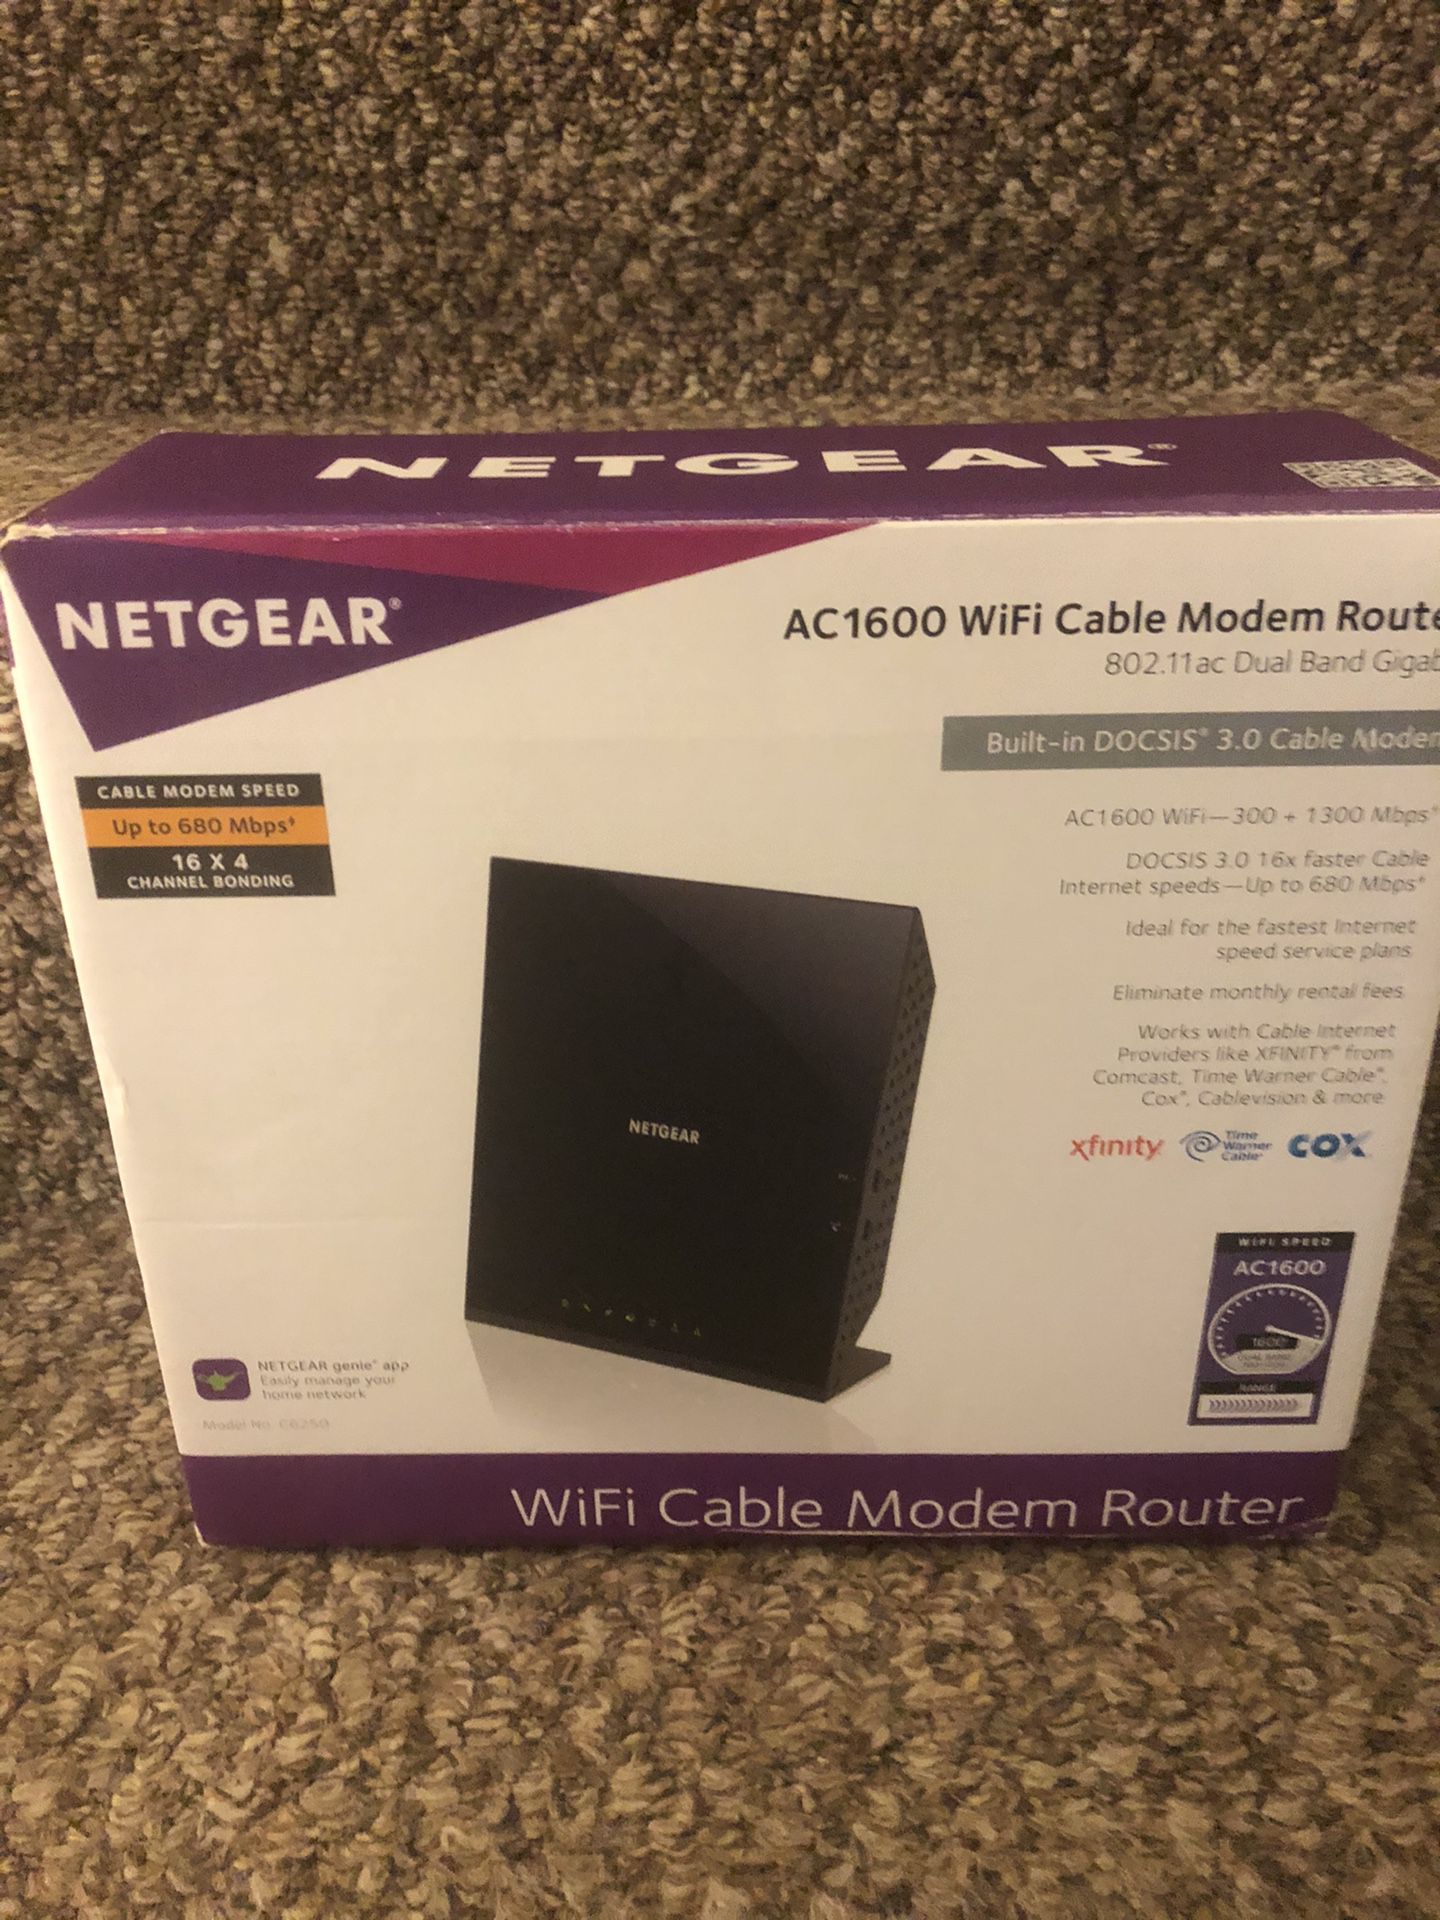 WiFi cable modem router by Netgear AC 1600